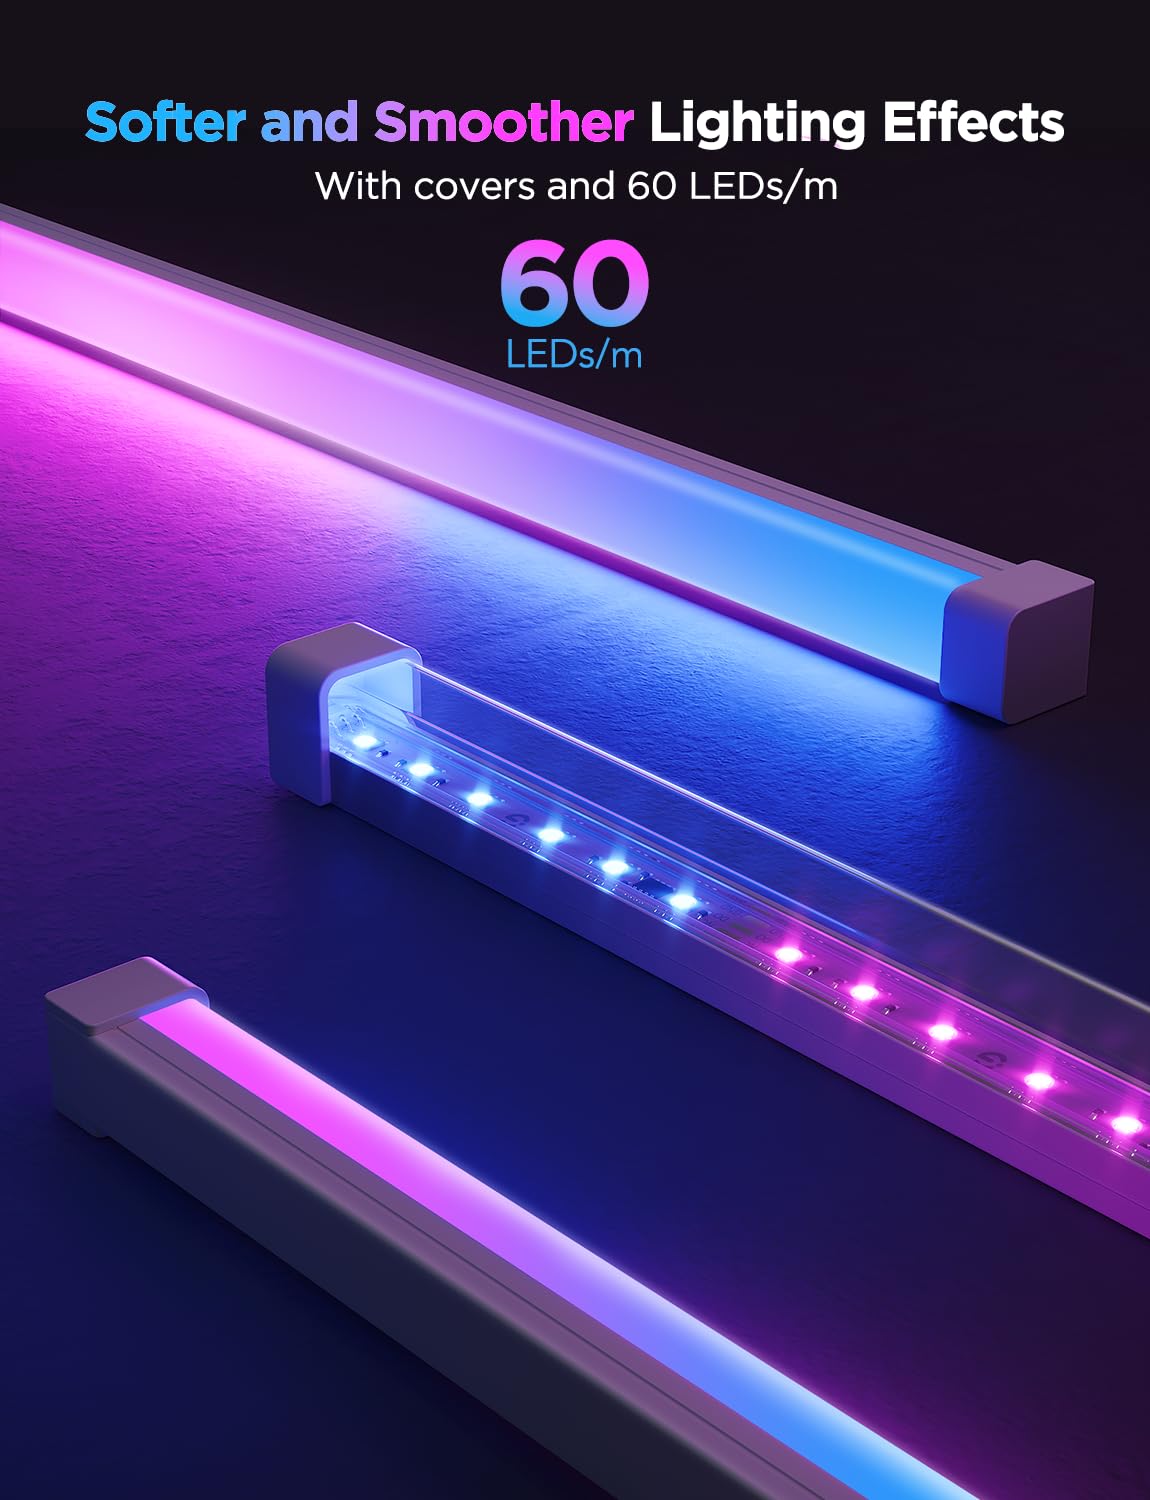 Govee RGBIC LED Strip Lights 16.4ft with Covers, Smart LED Lights Work with Alexa and Google Assistant, LED Diffuser Channel with LED Lights for Bedroom, Skirting Lines, Studio, Cabinet